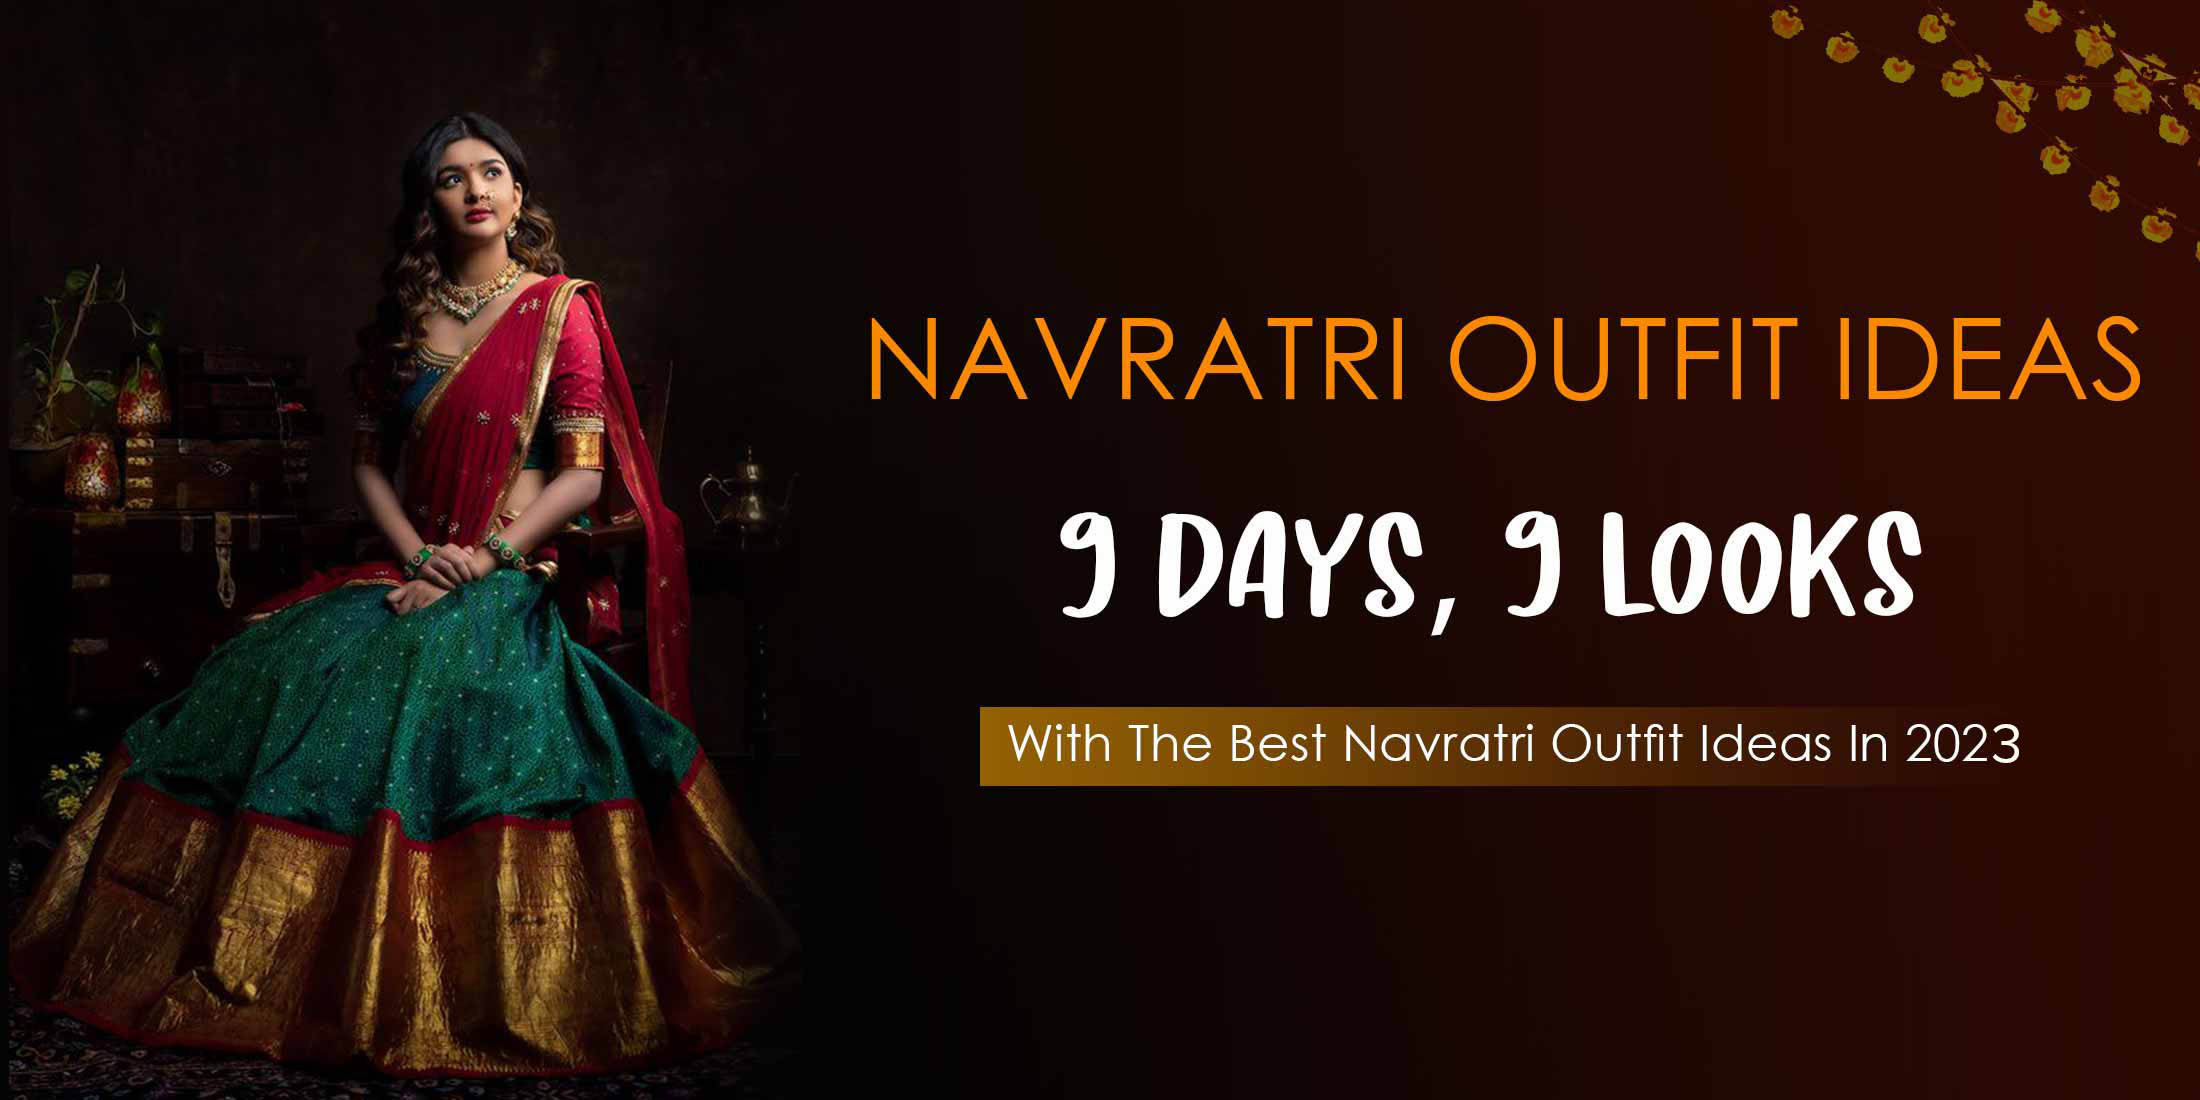 Navratri Outfit Ideas 2023 - Style 9 Days of Navratri with 9